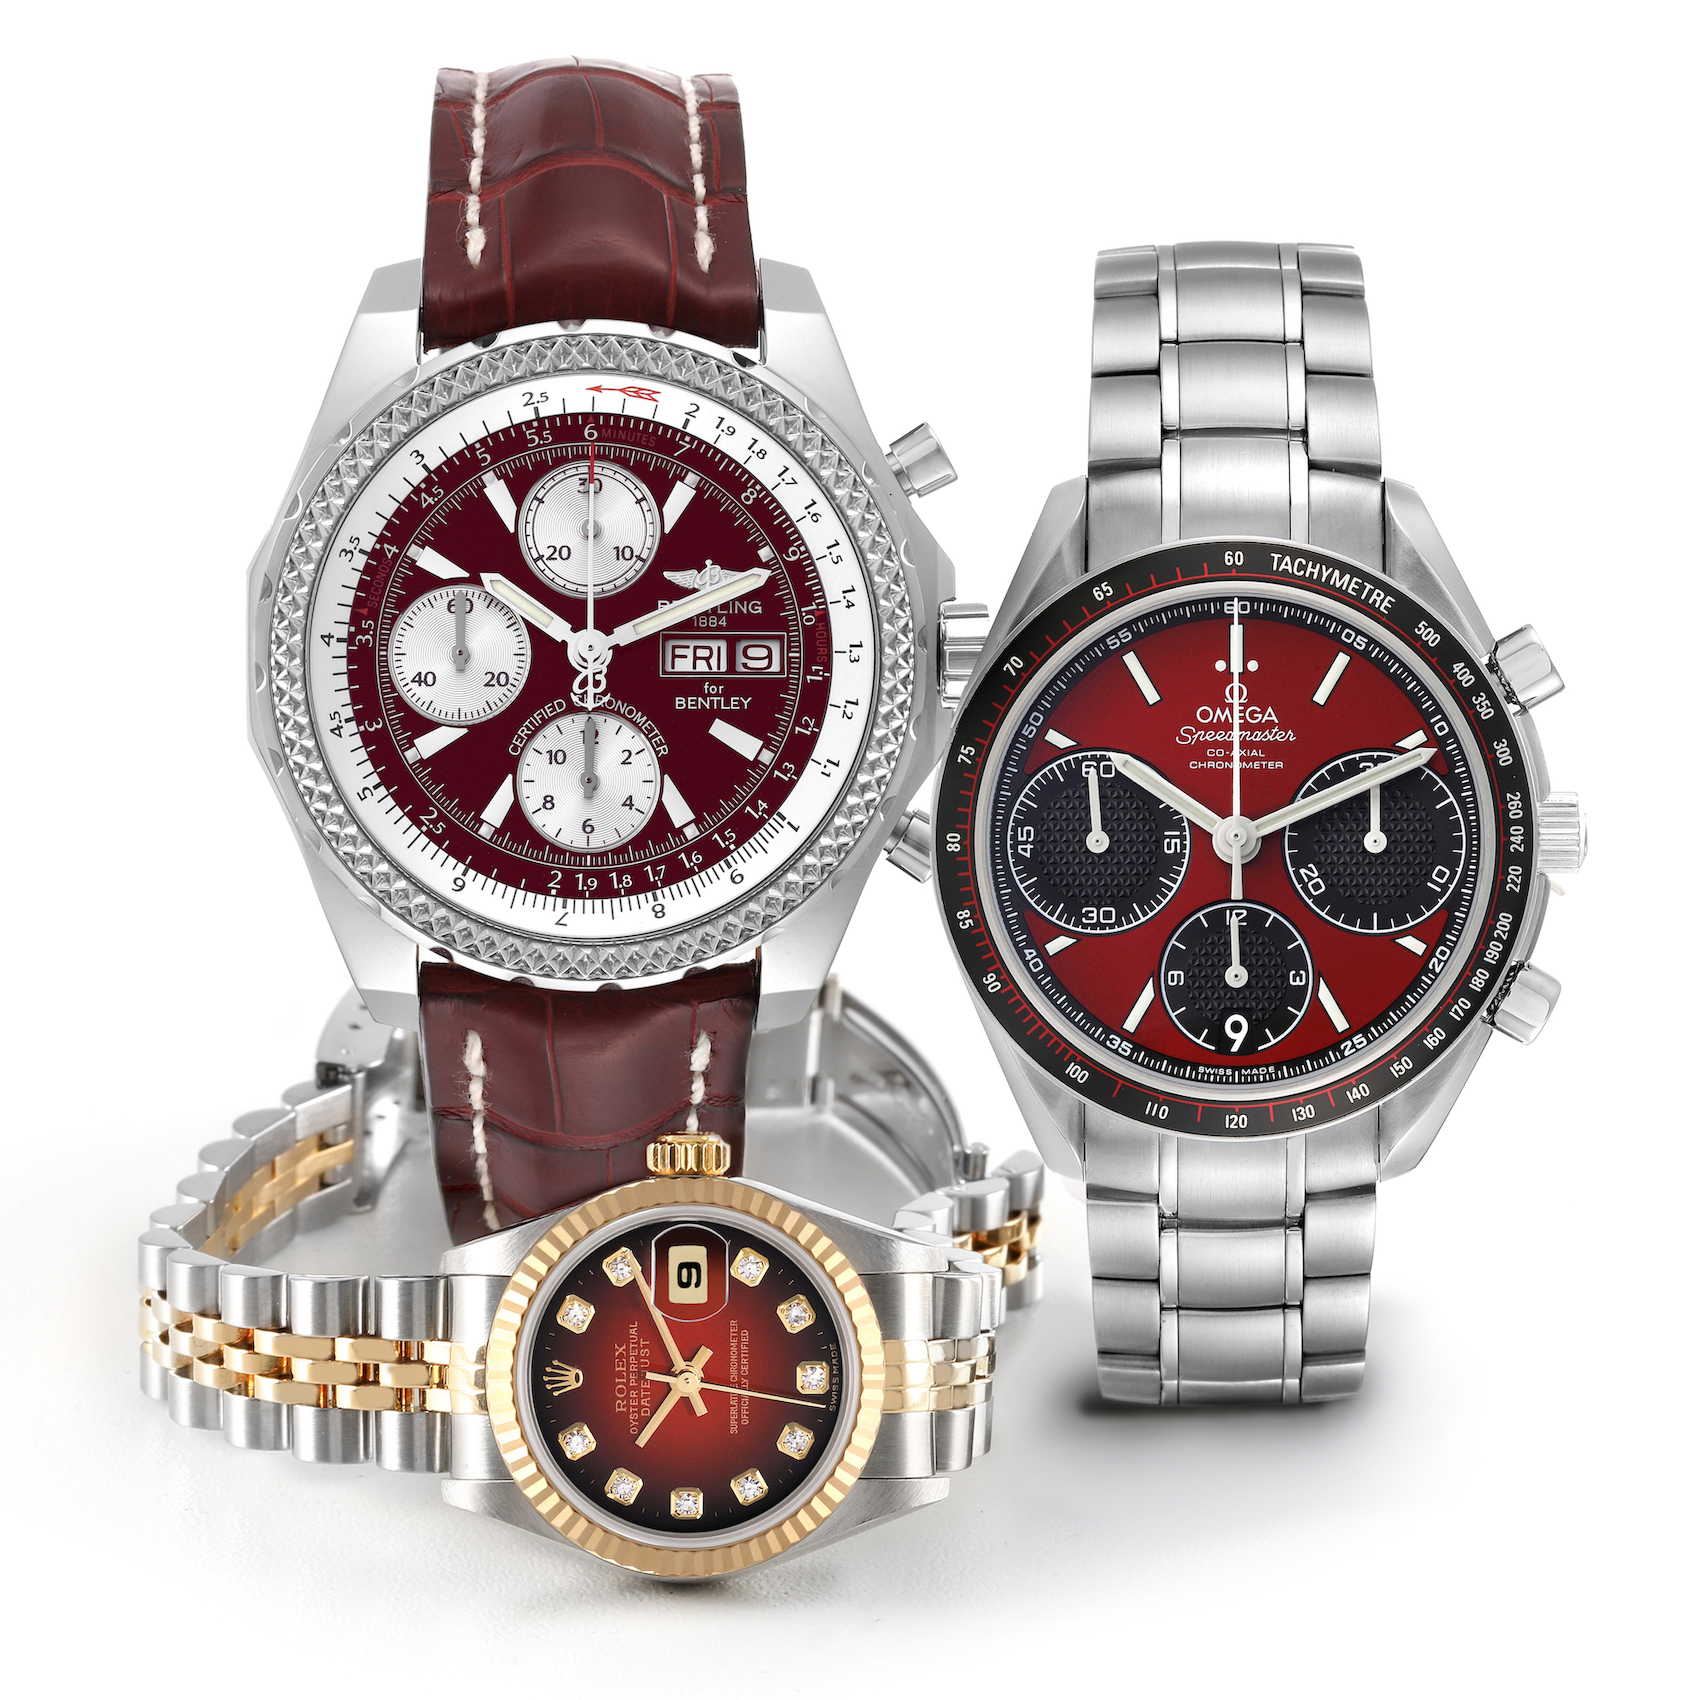 Red-accented watches in Steel and Steel and Yellow Gold - Rolex Datejust, Omega Speedmaster Racing, and Breitling Bentley Motors GT